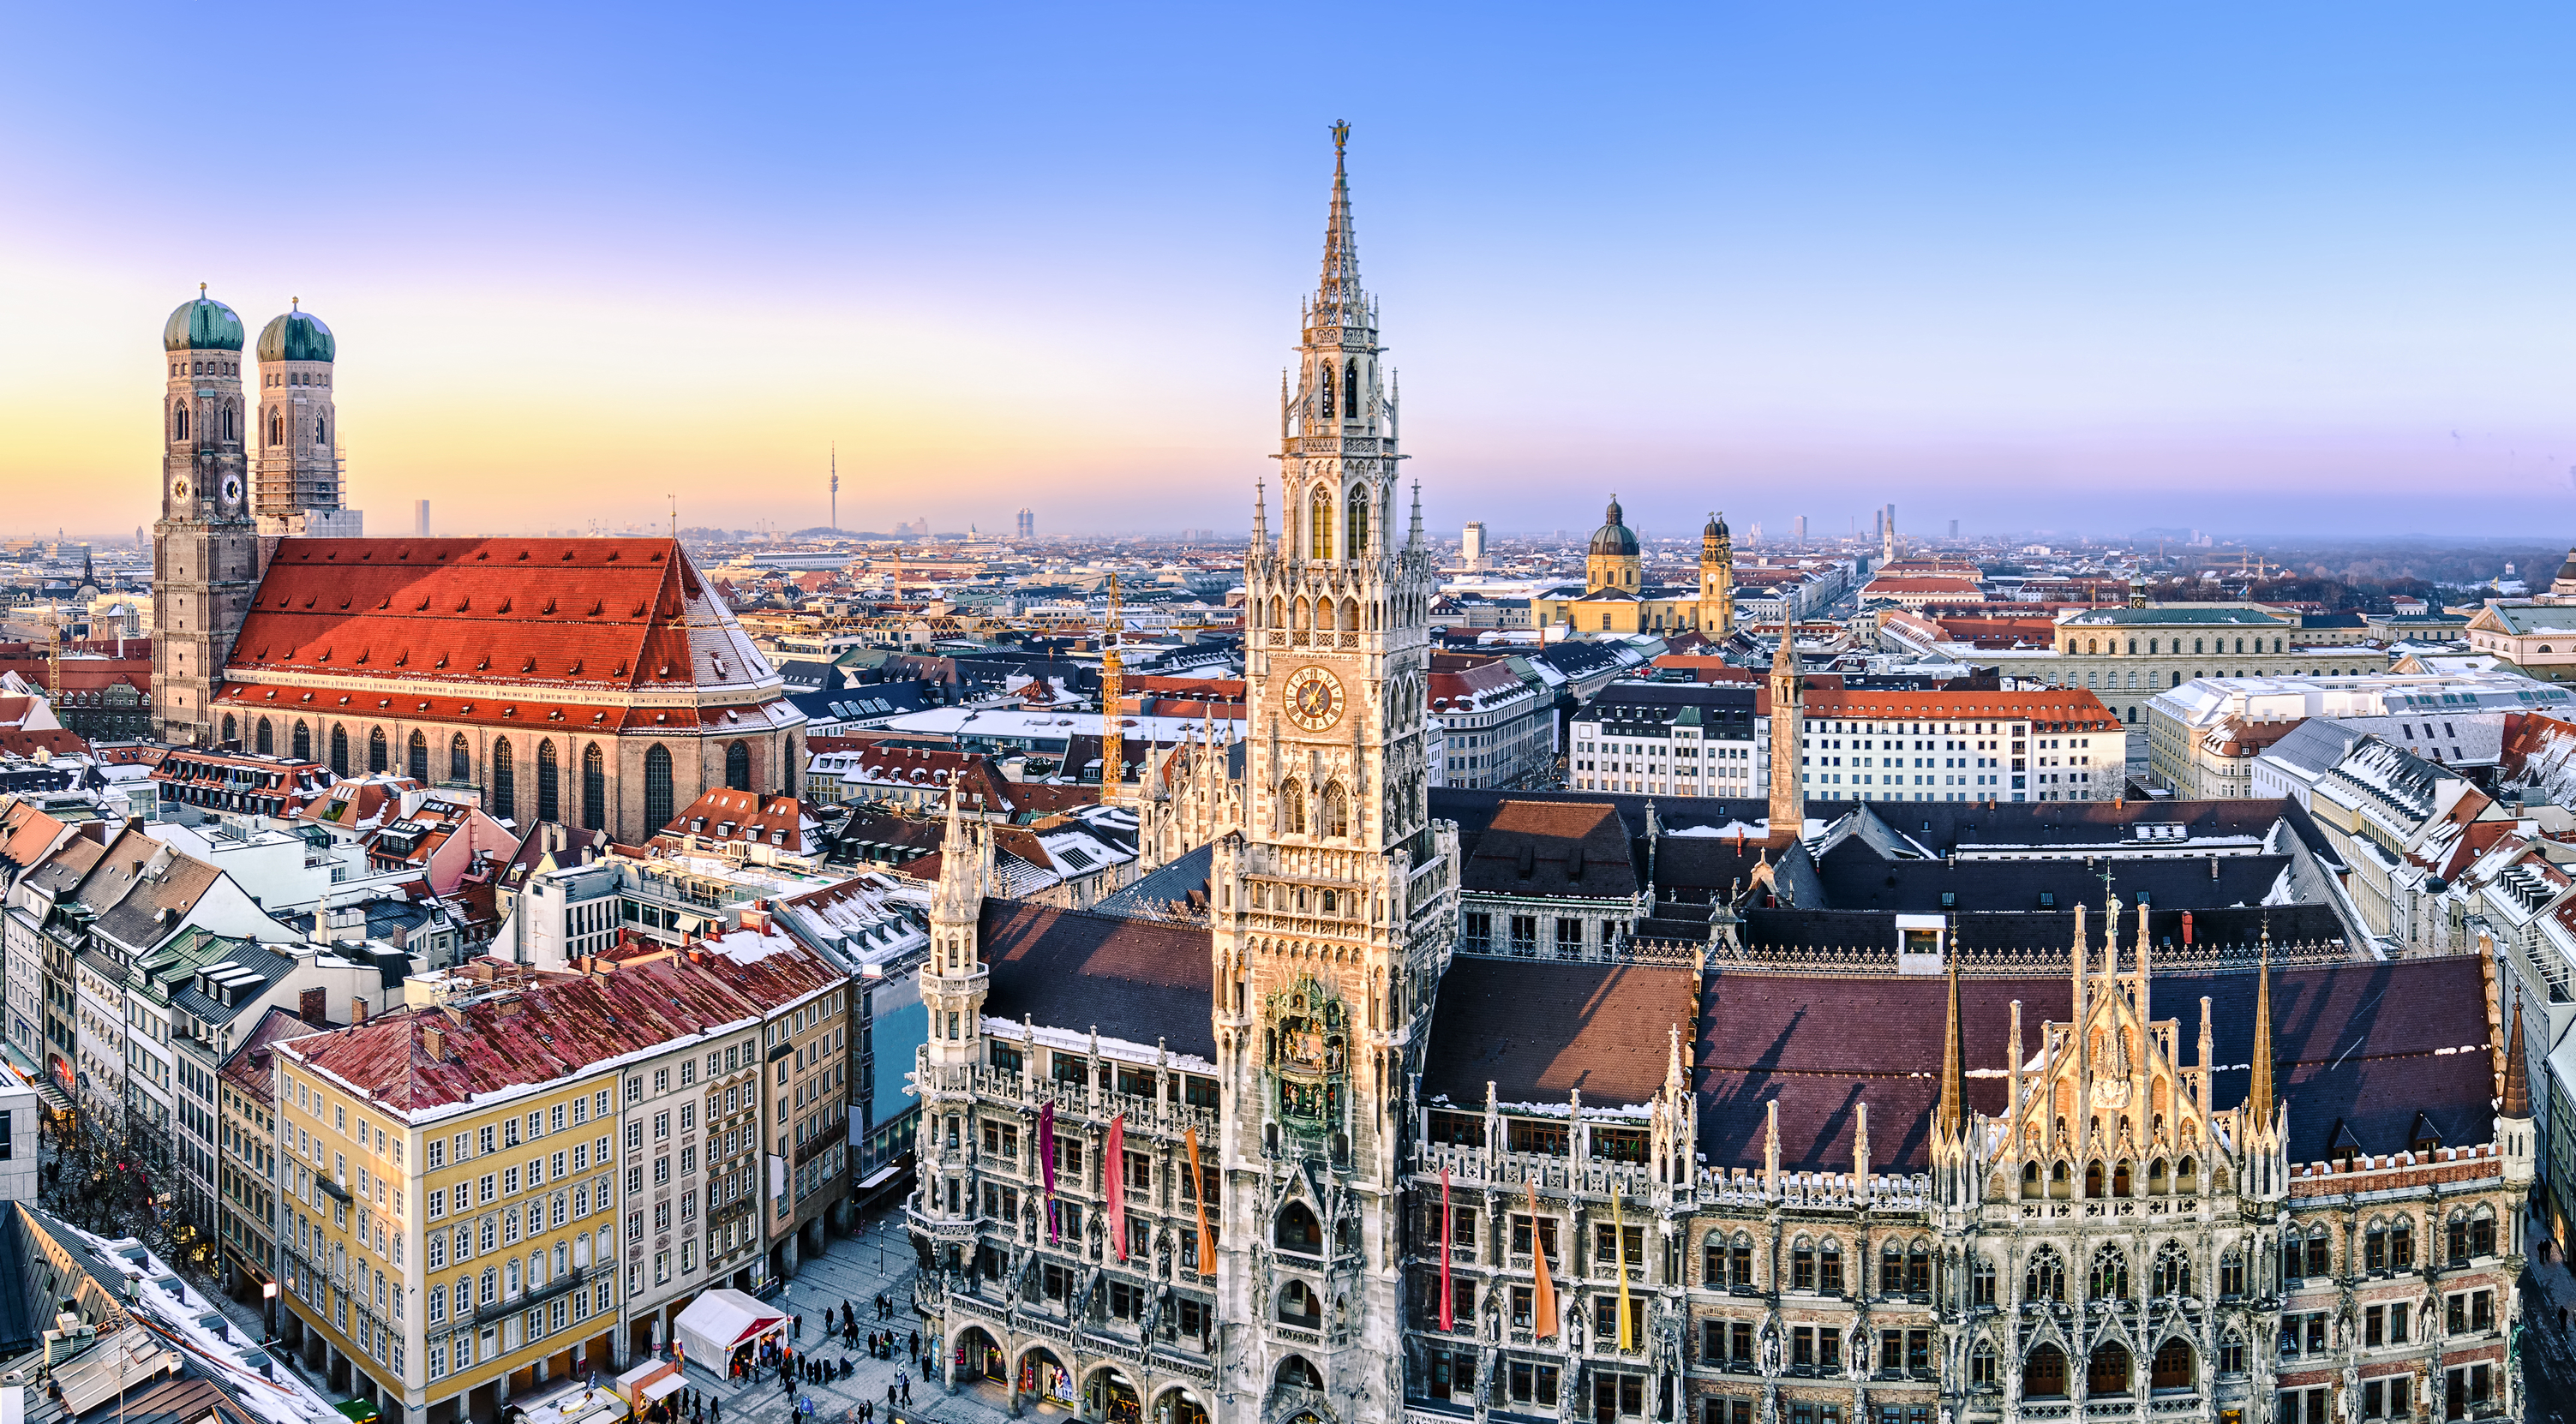 8-night Switzerland, Germany & Austria escape with flights and hotels from $1,356